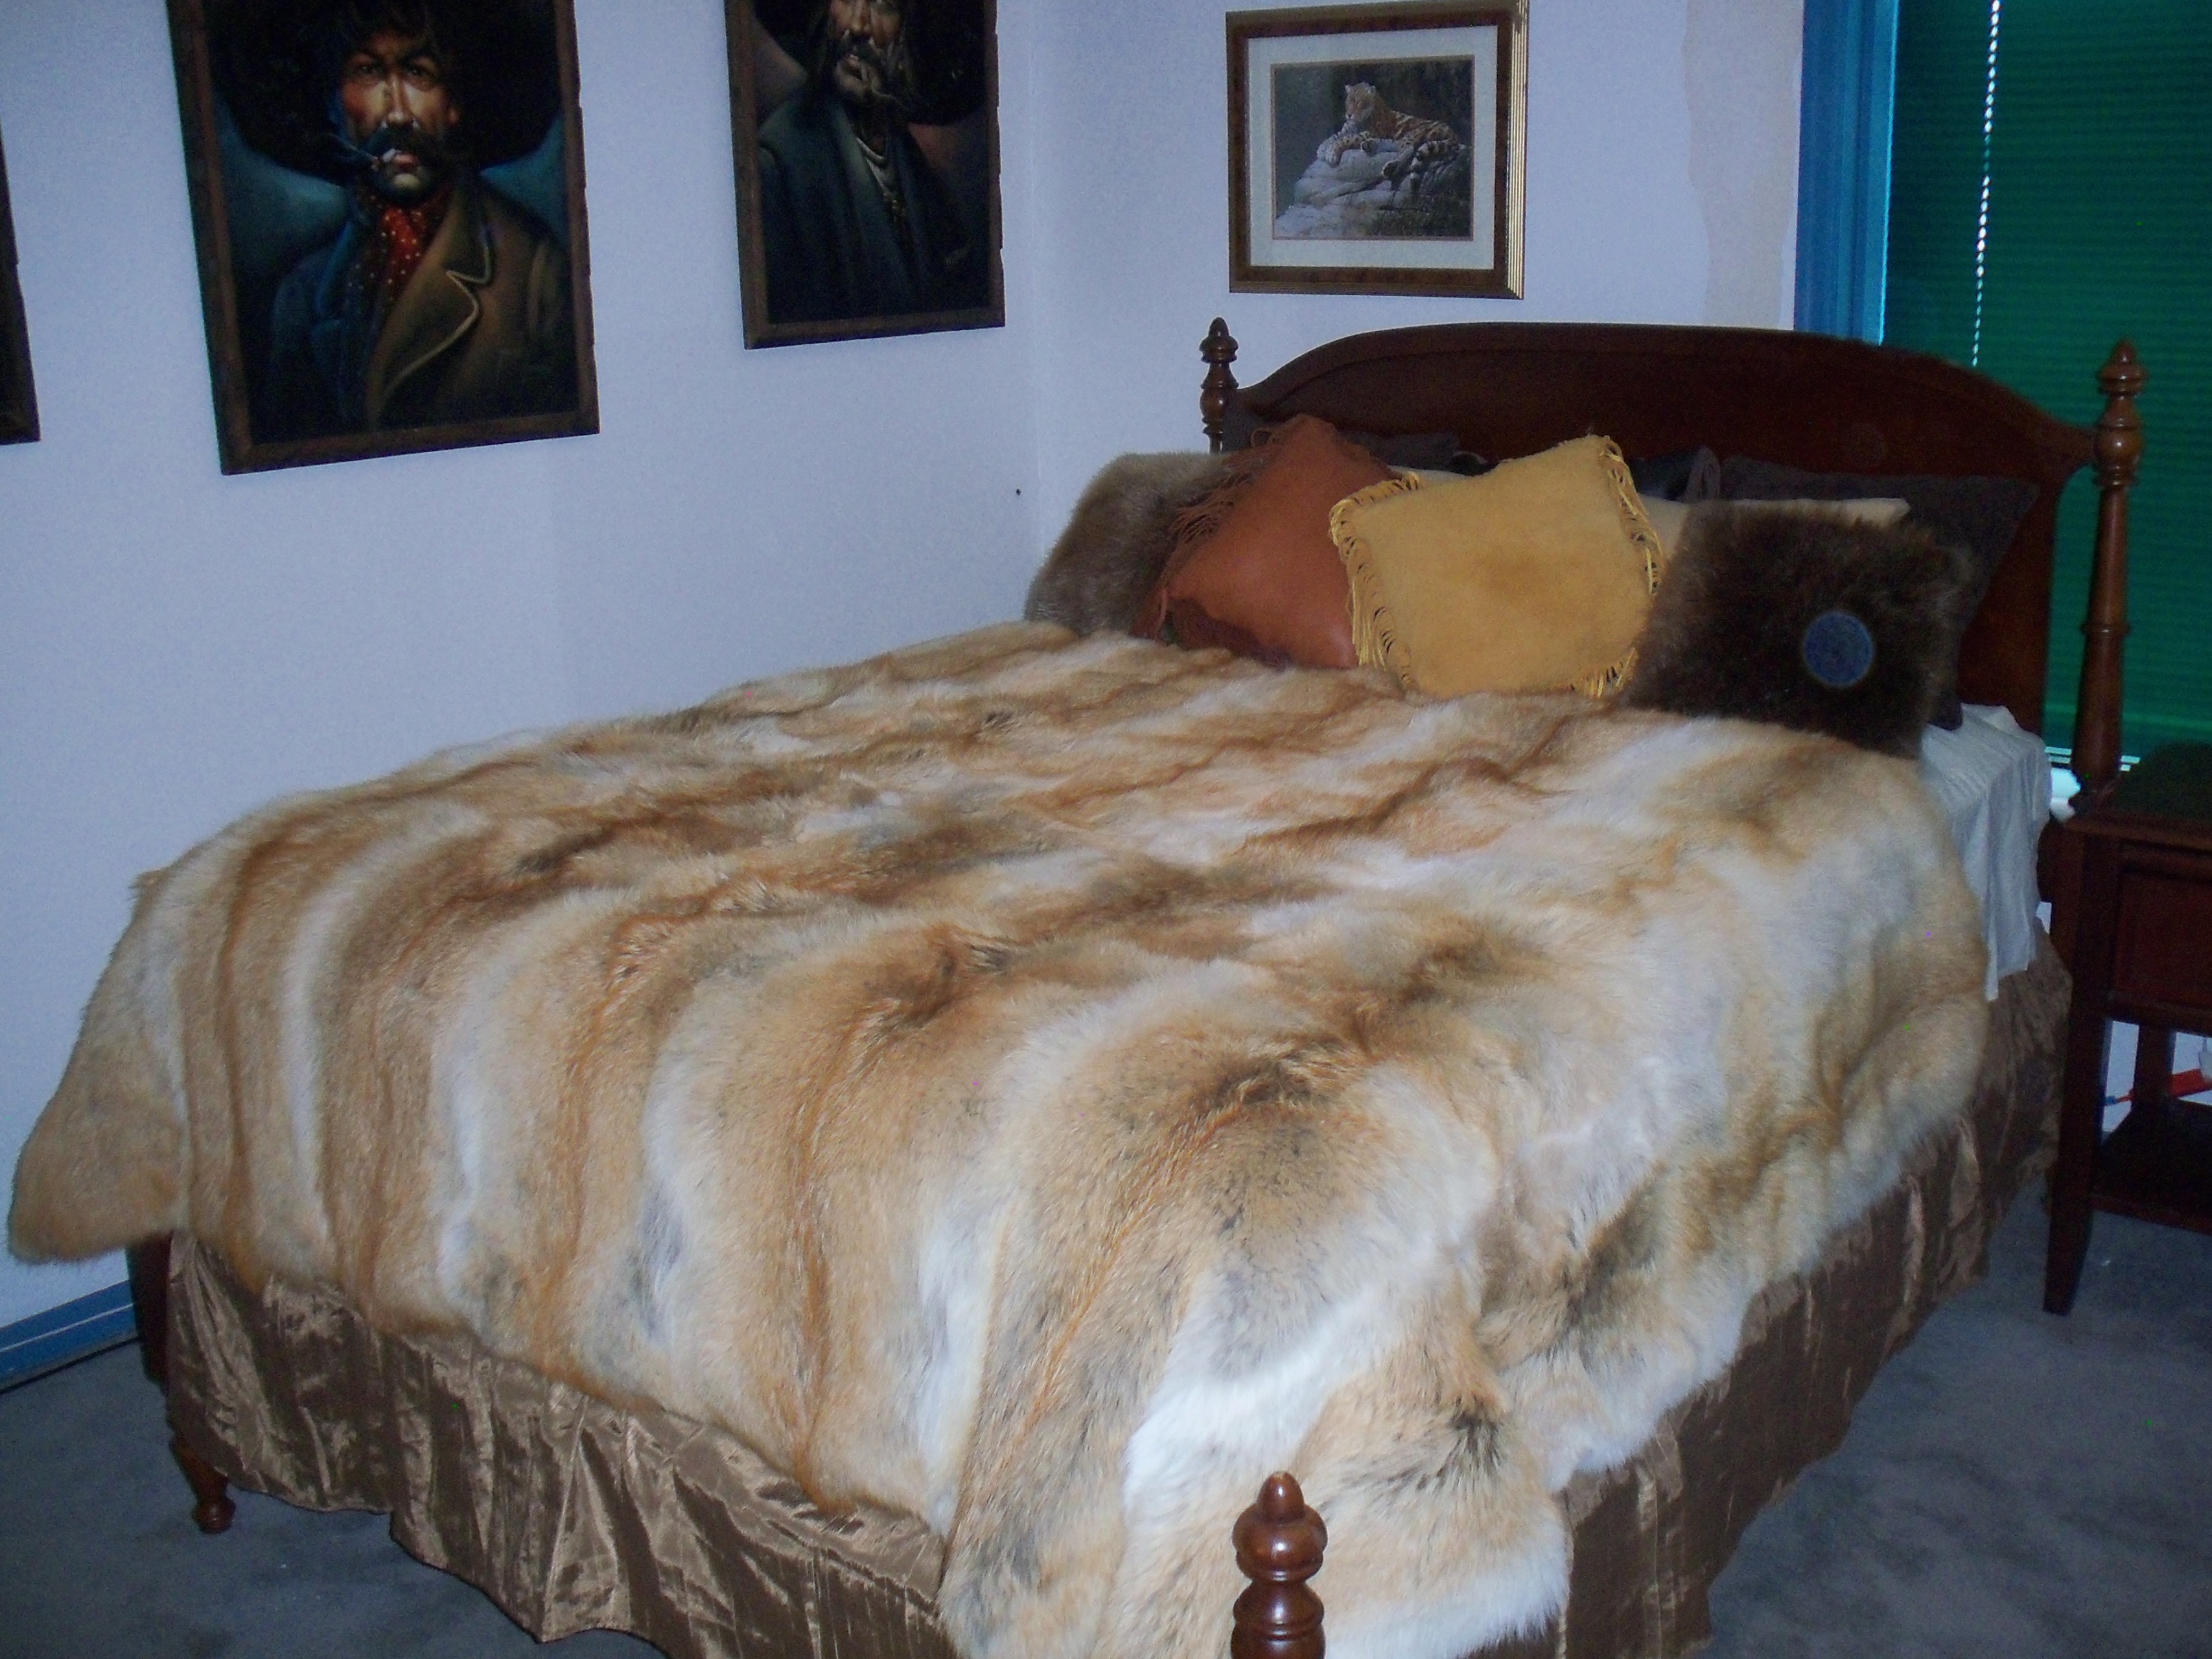 Double Face Coyote  Real Fur Throw - Blanket 